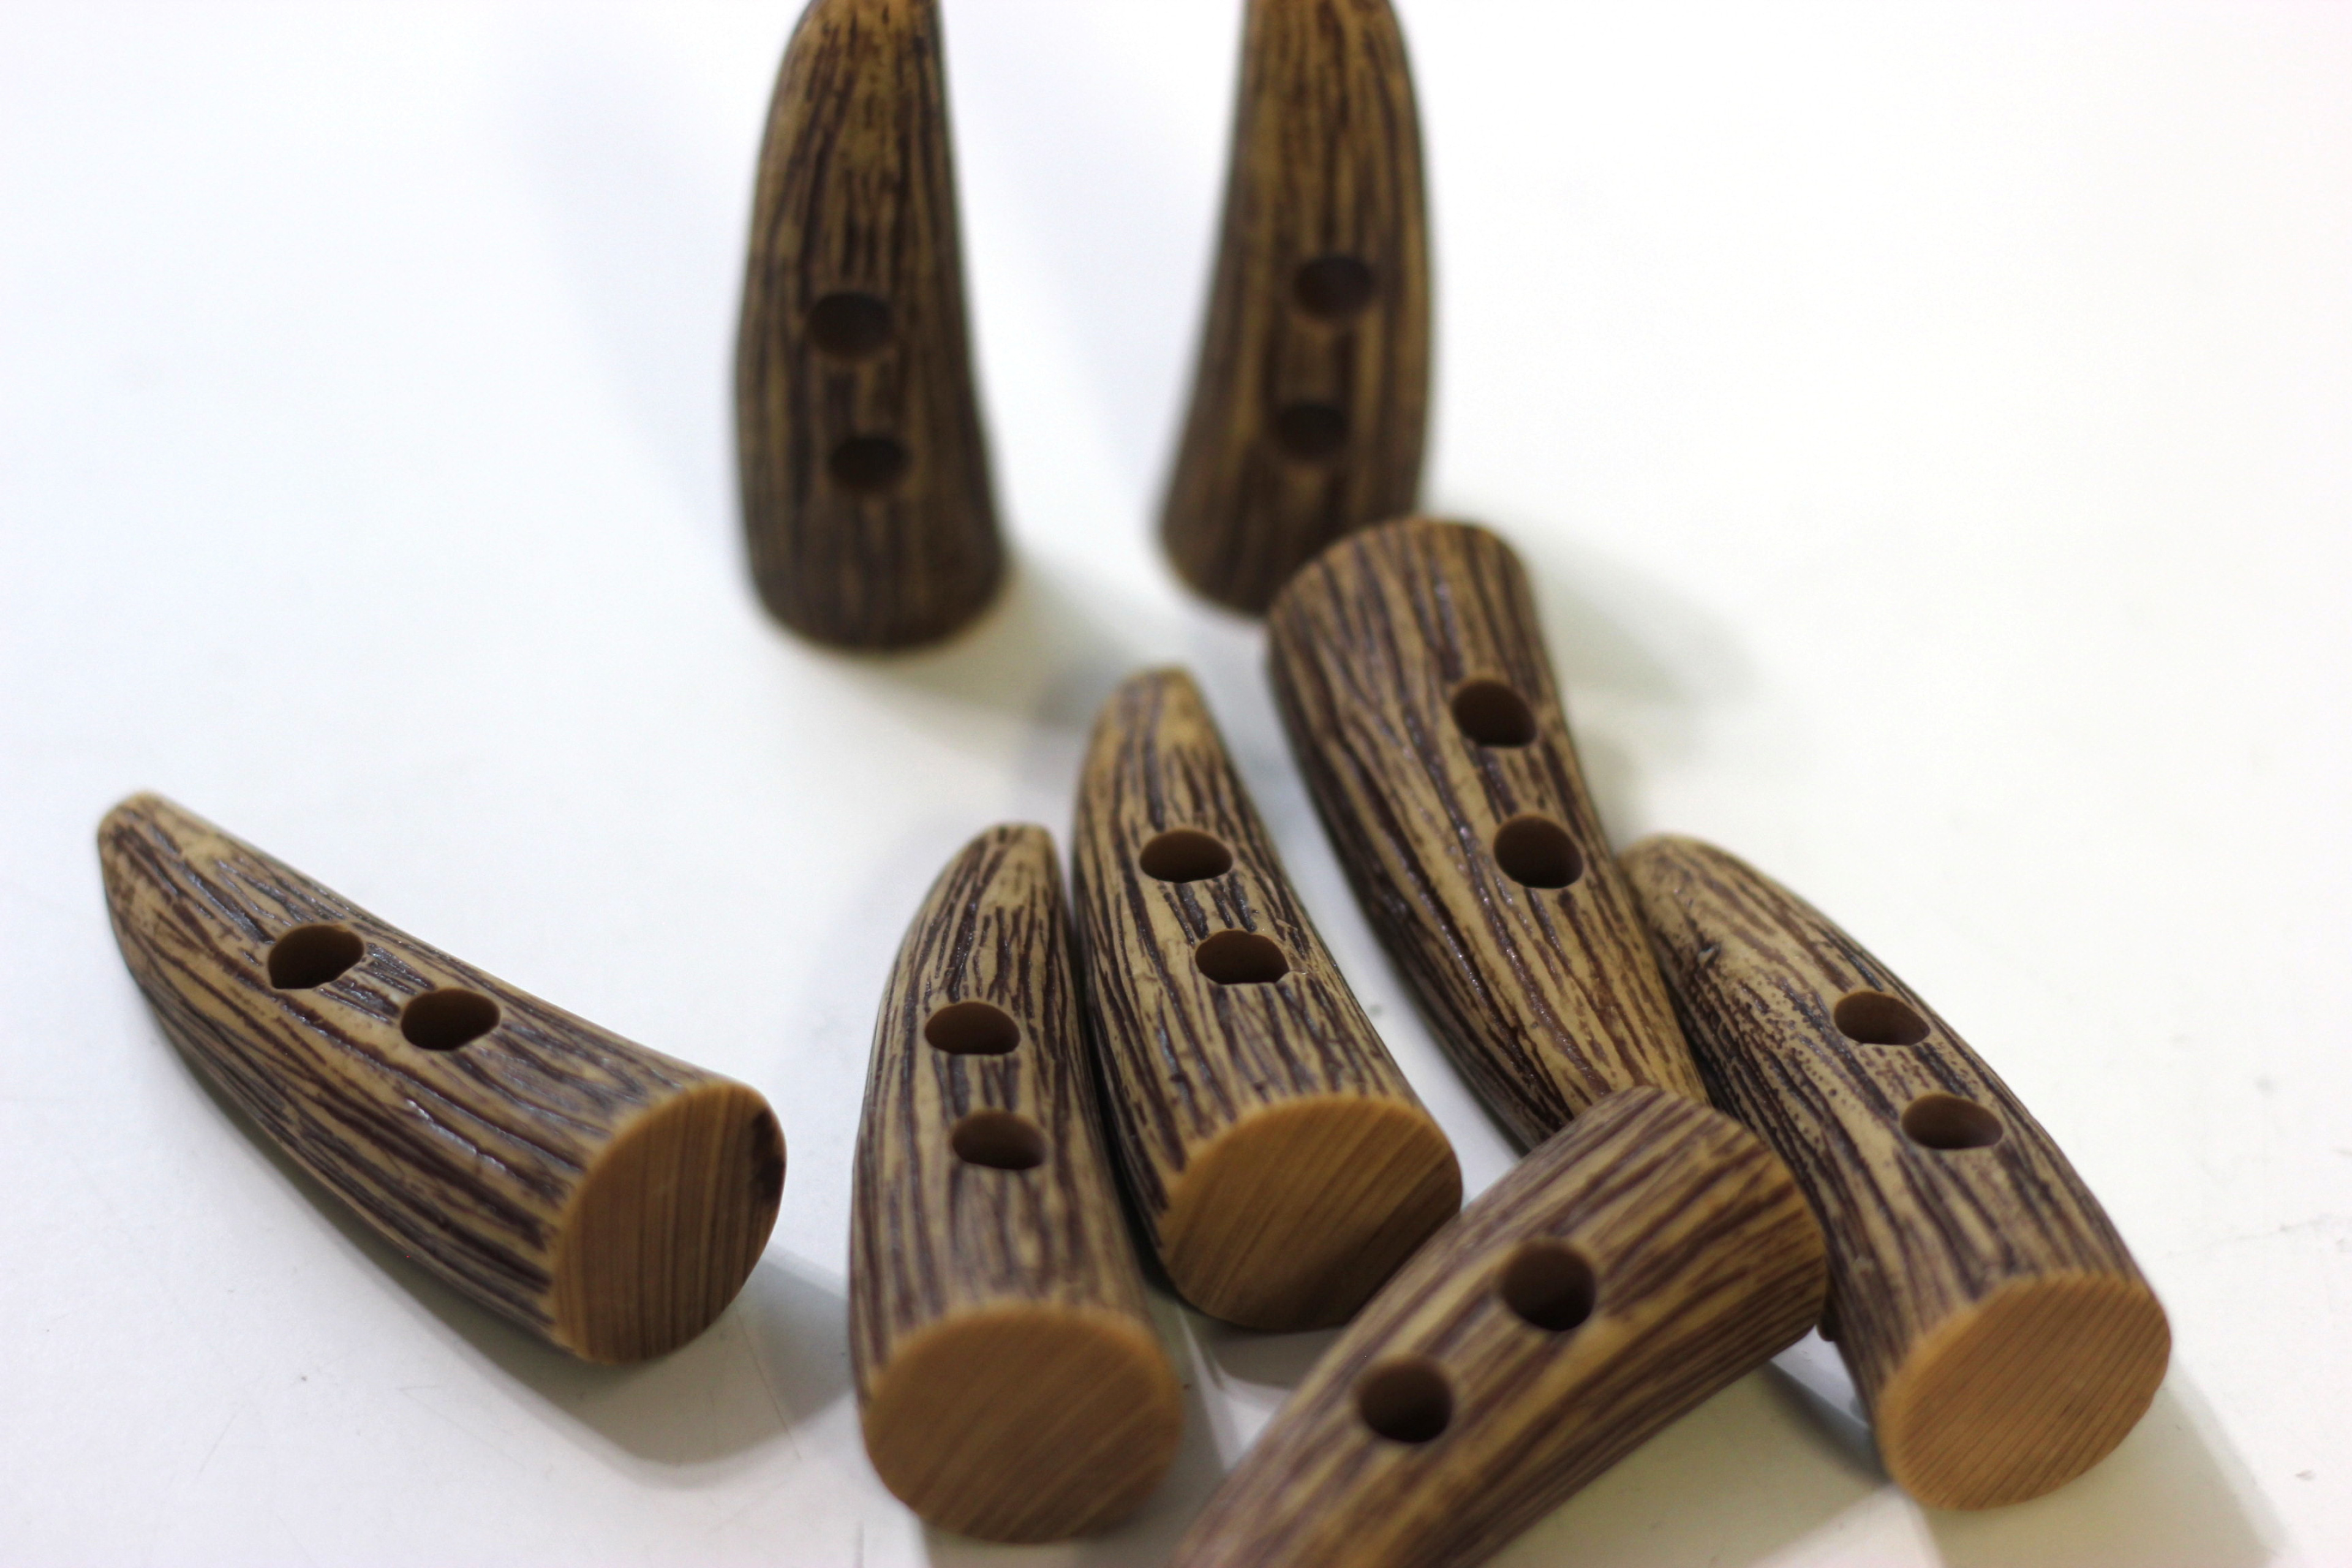  Natural Horn Toggles,Polish Tooth Horn for Coats &  Jackets,Toggle Buttons,Horn Buttons for Craft Medieval & Fantastic  Accessories,Natural Horn Shape 2 Hole Scrapbooking Sewing Toggle Wood  Buttons 5Pcs